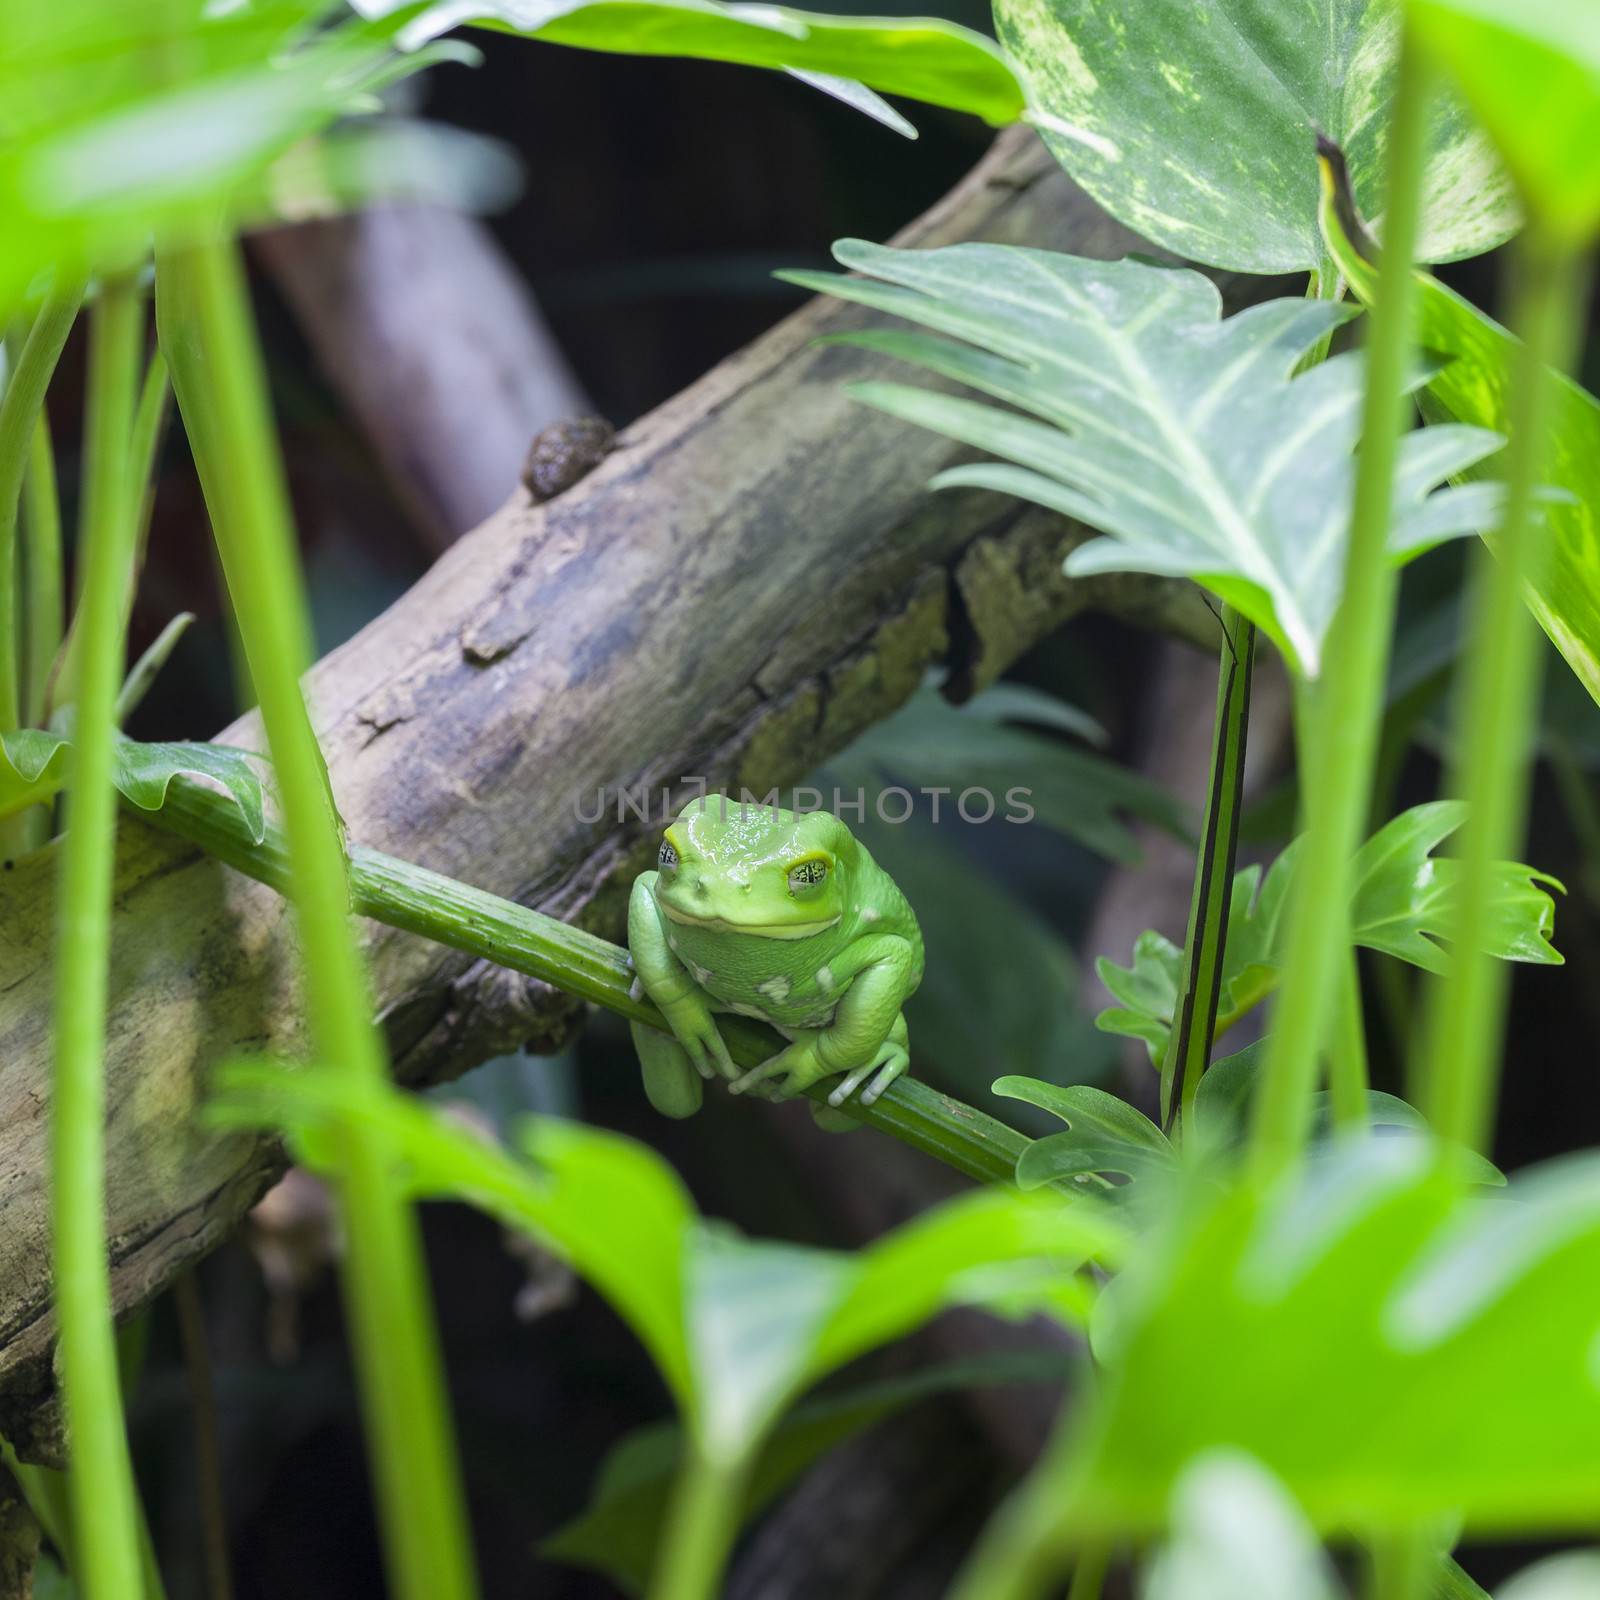 View of Green monkey frog by vwalakte